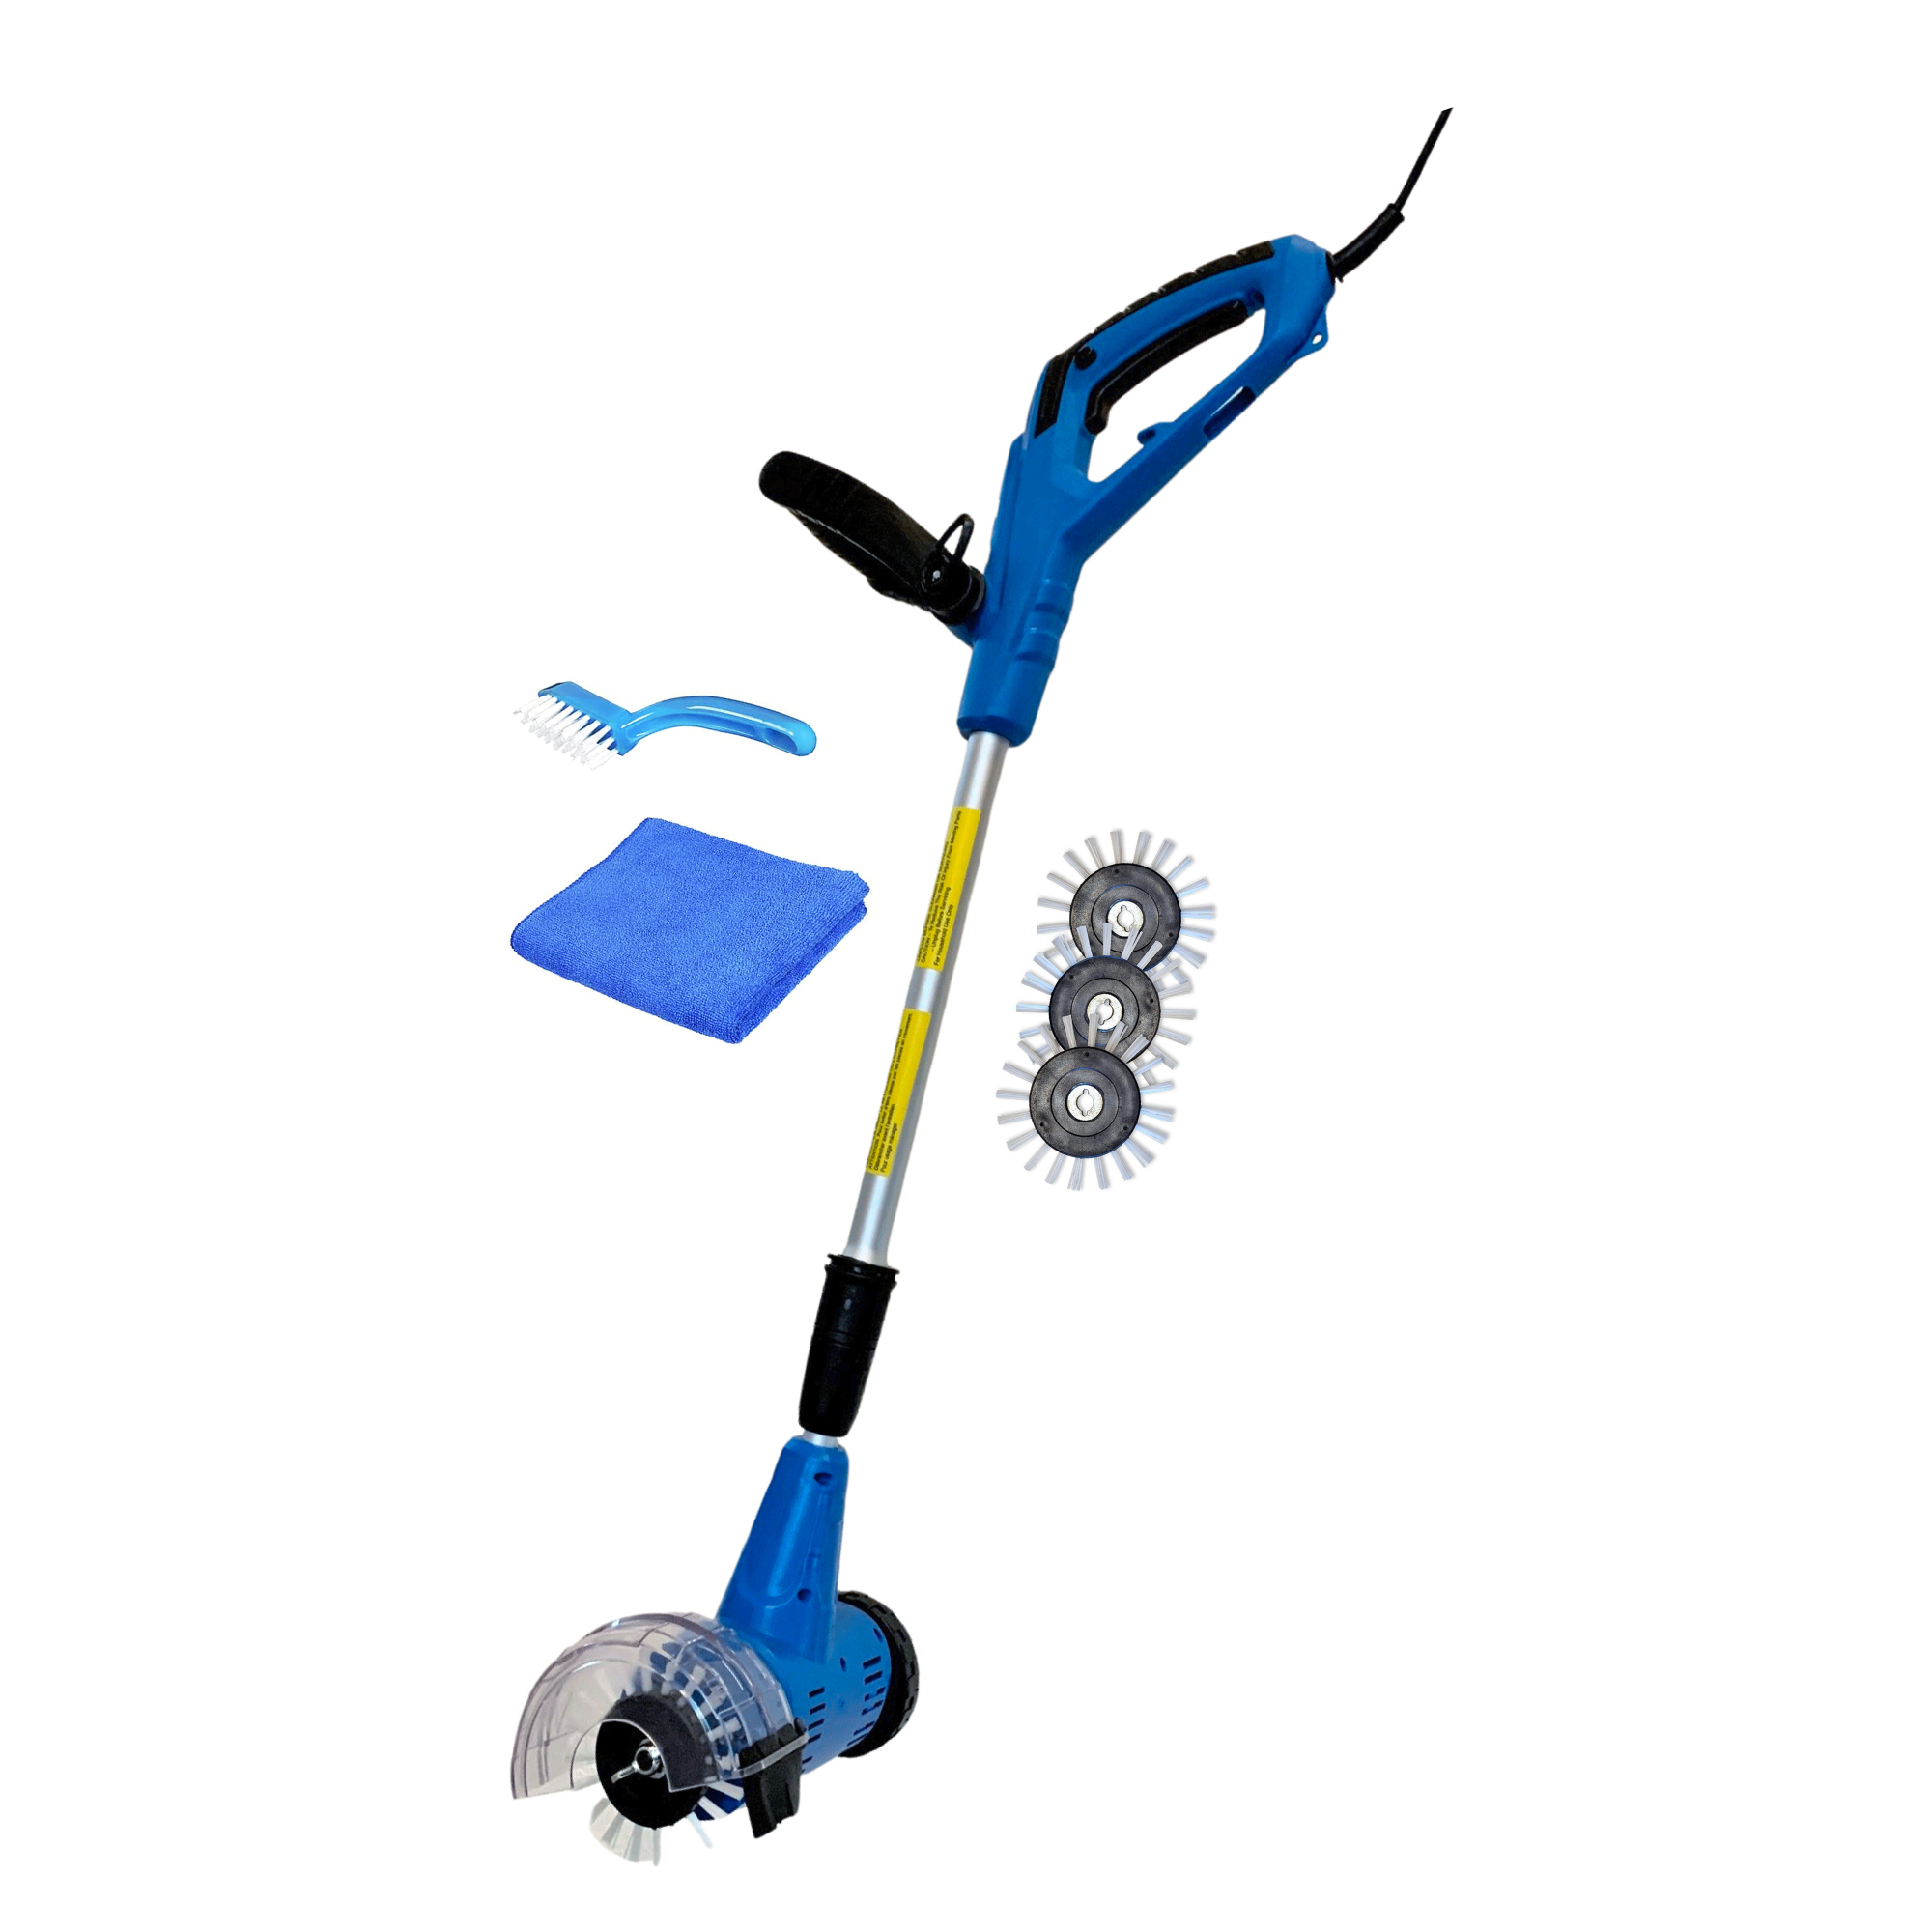 Grout Groovy Original Grout Cleaning Machine – Grout Groovy®